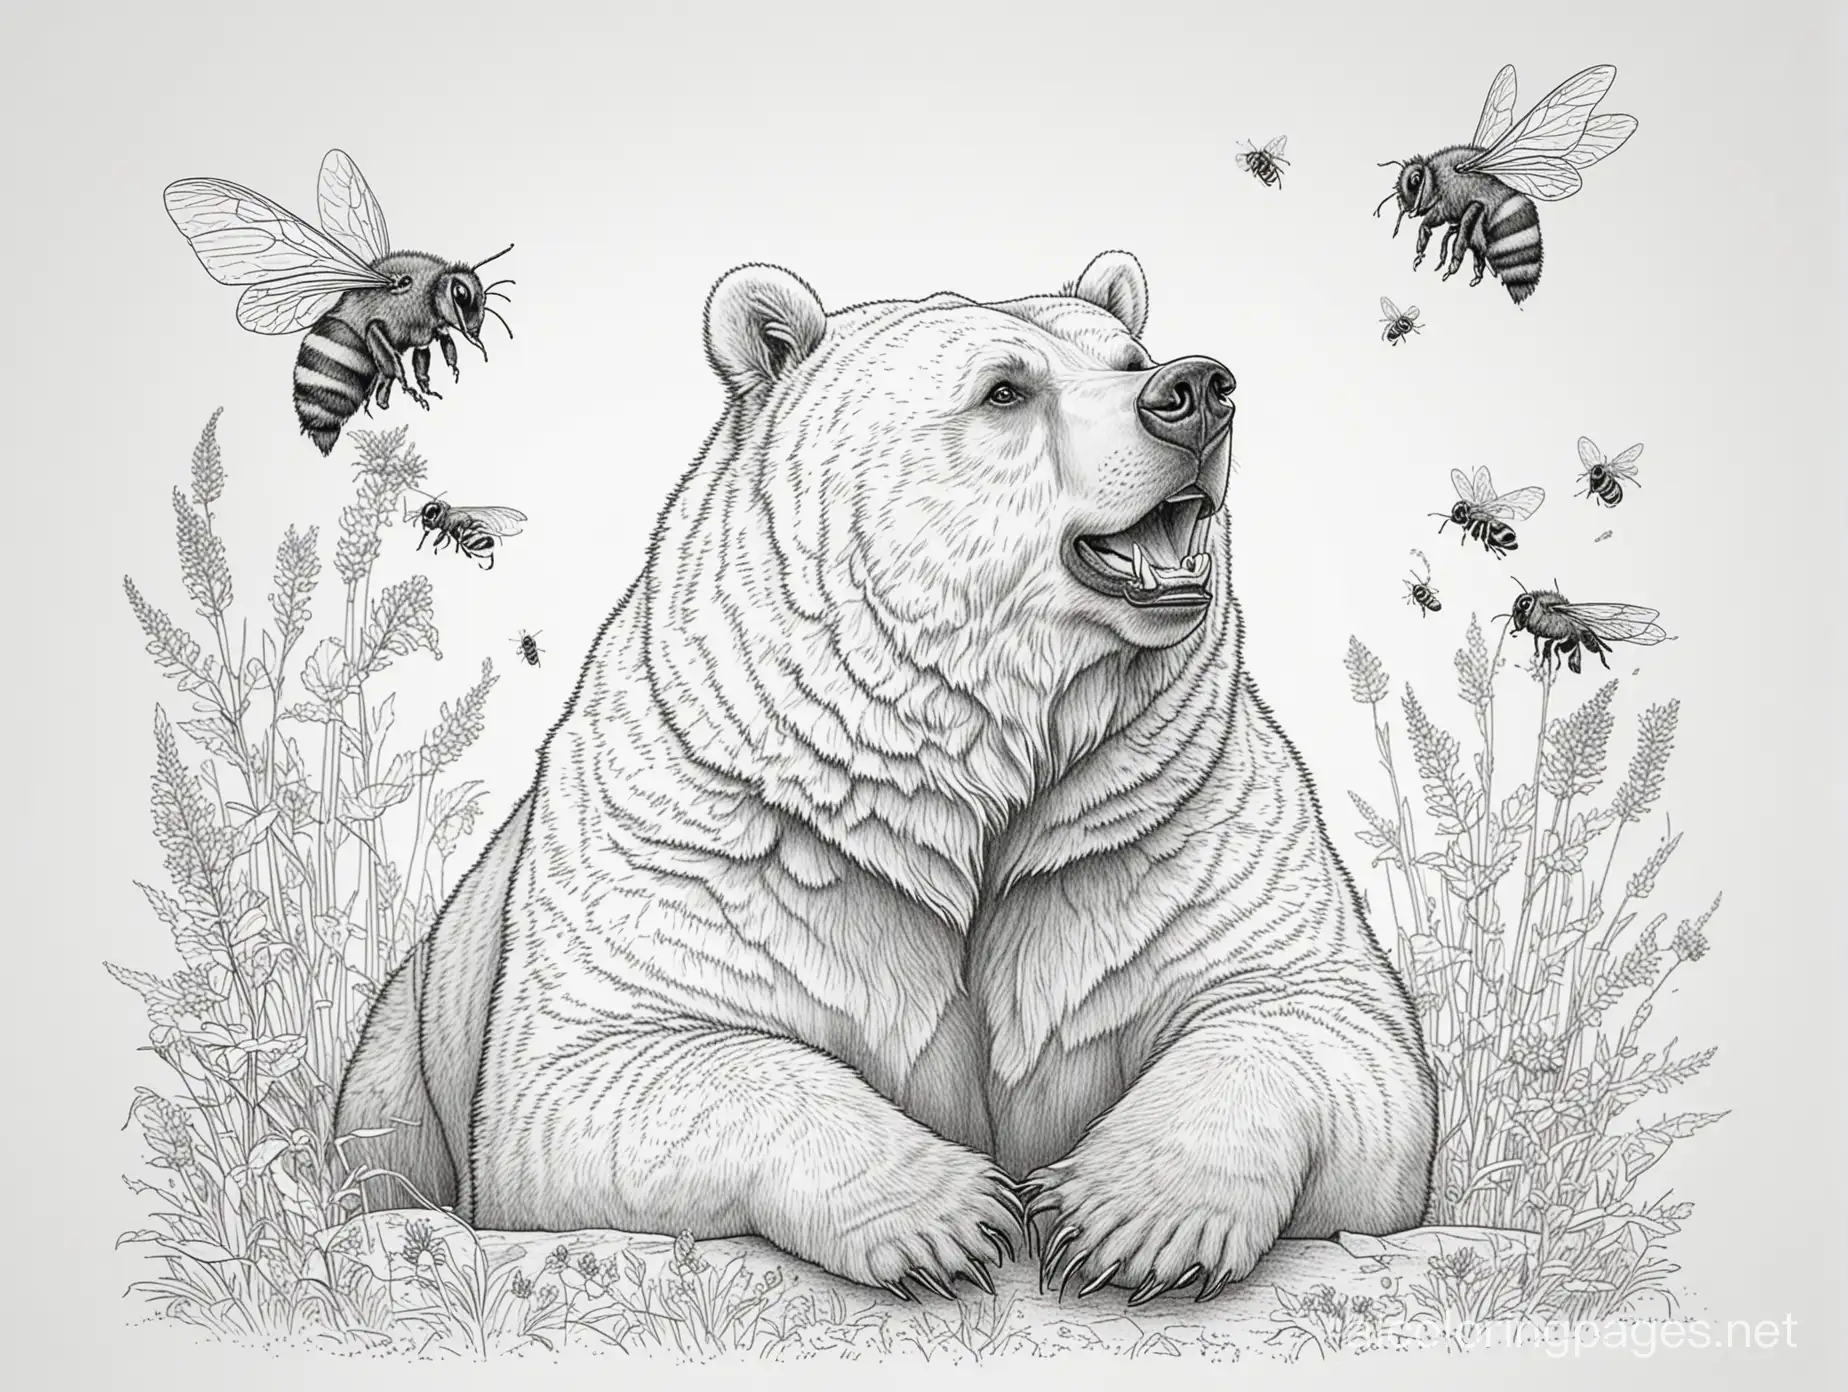 A grizzly bear sitting down with a bee flying in front of its face, Coloring Page, black and white, line art, white background, Simplicity, Ample White Space. The background of the coloring page is plain white to make it easy for young children to color within the lines. The outlines of all the subjects are easy to distinguish, making it simple for kids to color without too much difficulty